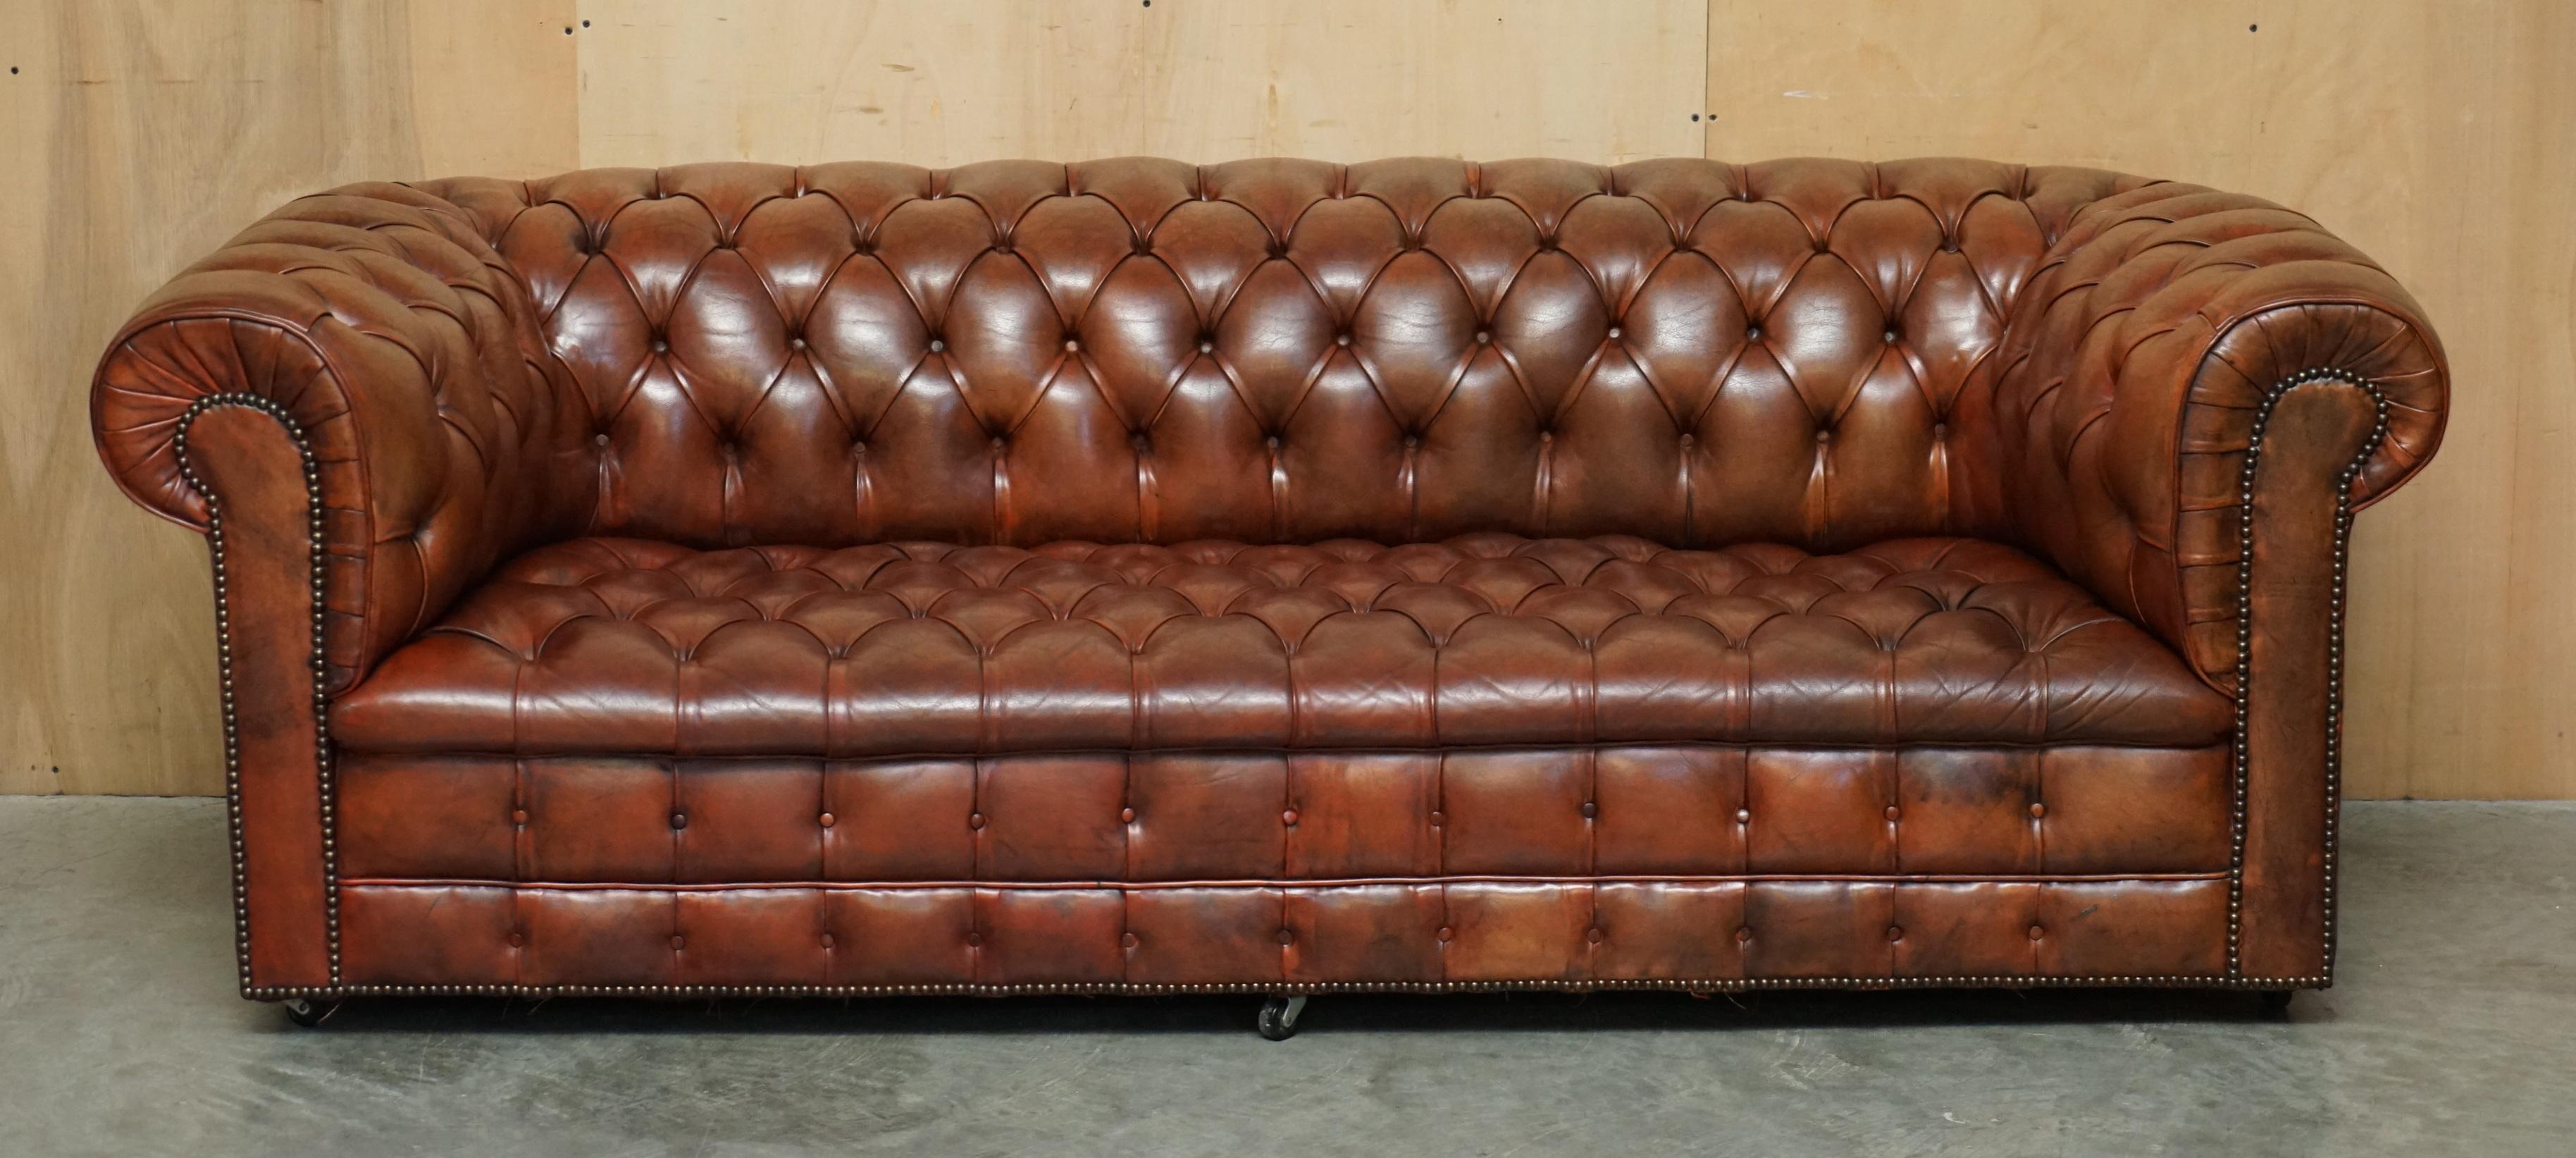 Royal House Antiques

Royal House Antiques is delighted to offer for sale this absolutely stunning original circa 1920's, super comfortable, fully coil sprung, hand dyed saddle brown leather club sofa with Chesterfield tufting

Please note the